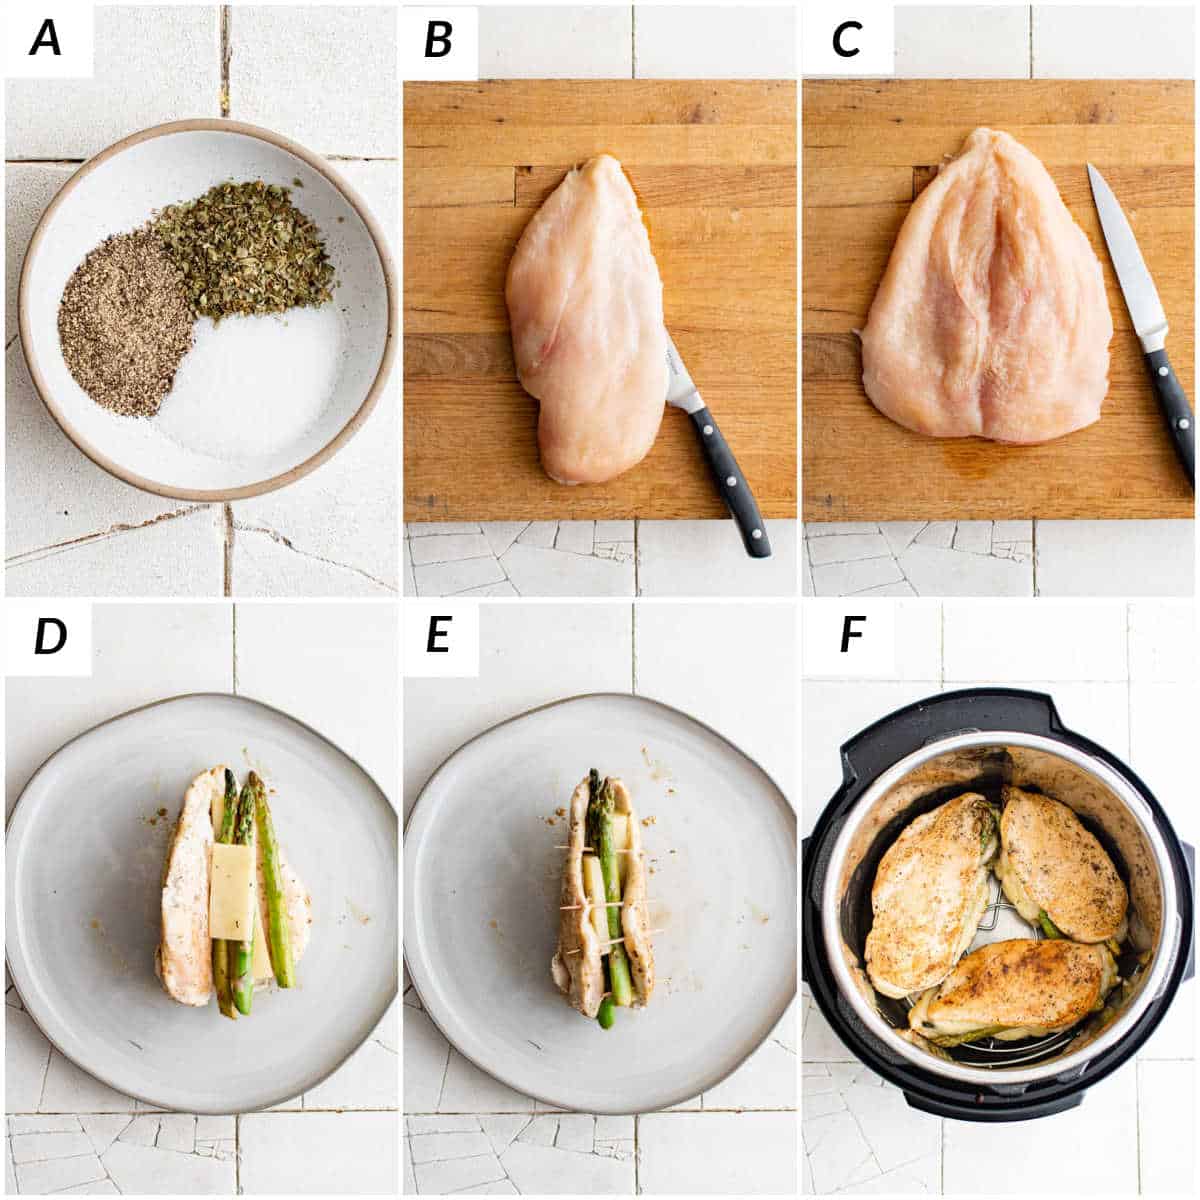 image collage showing the steps for making instant pot stuffed chicken breast